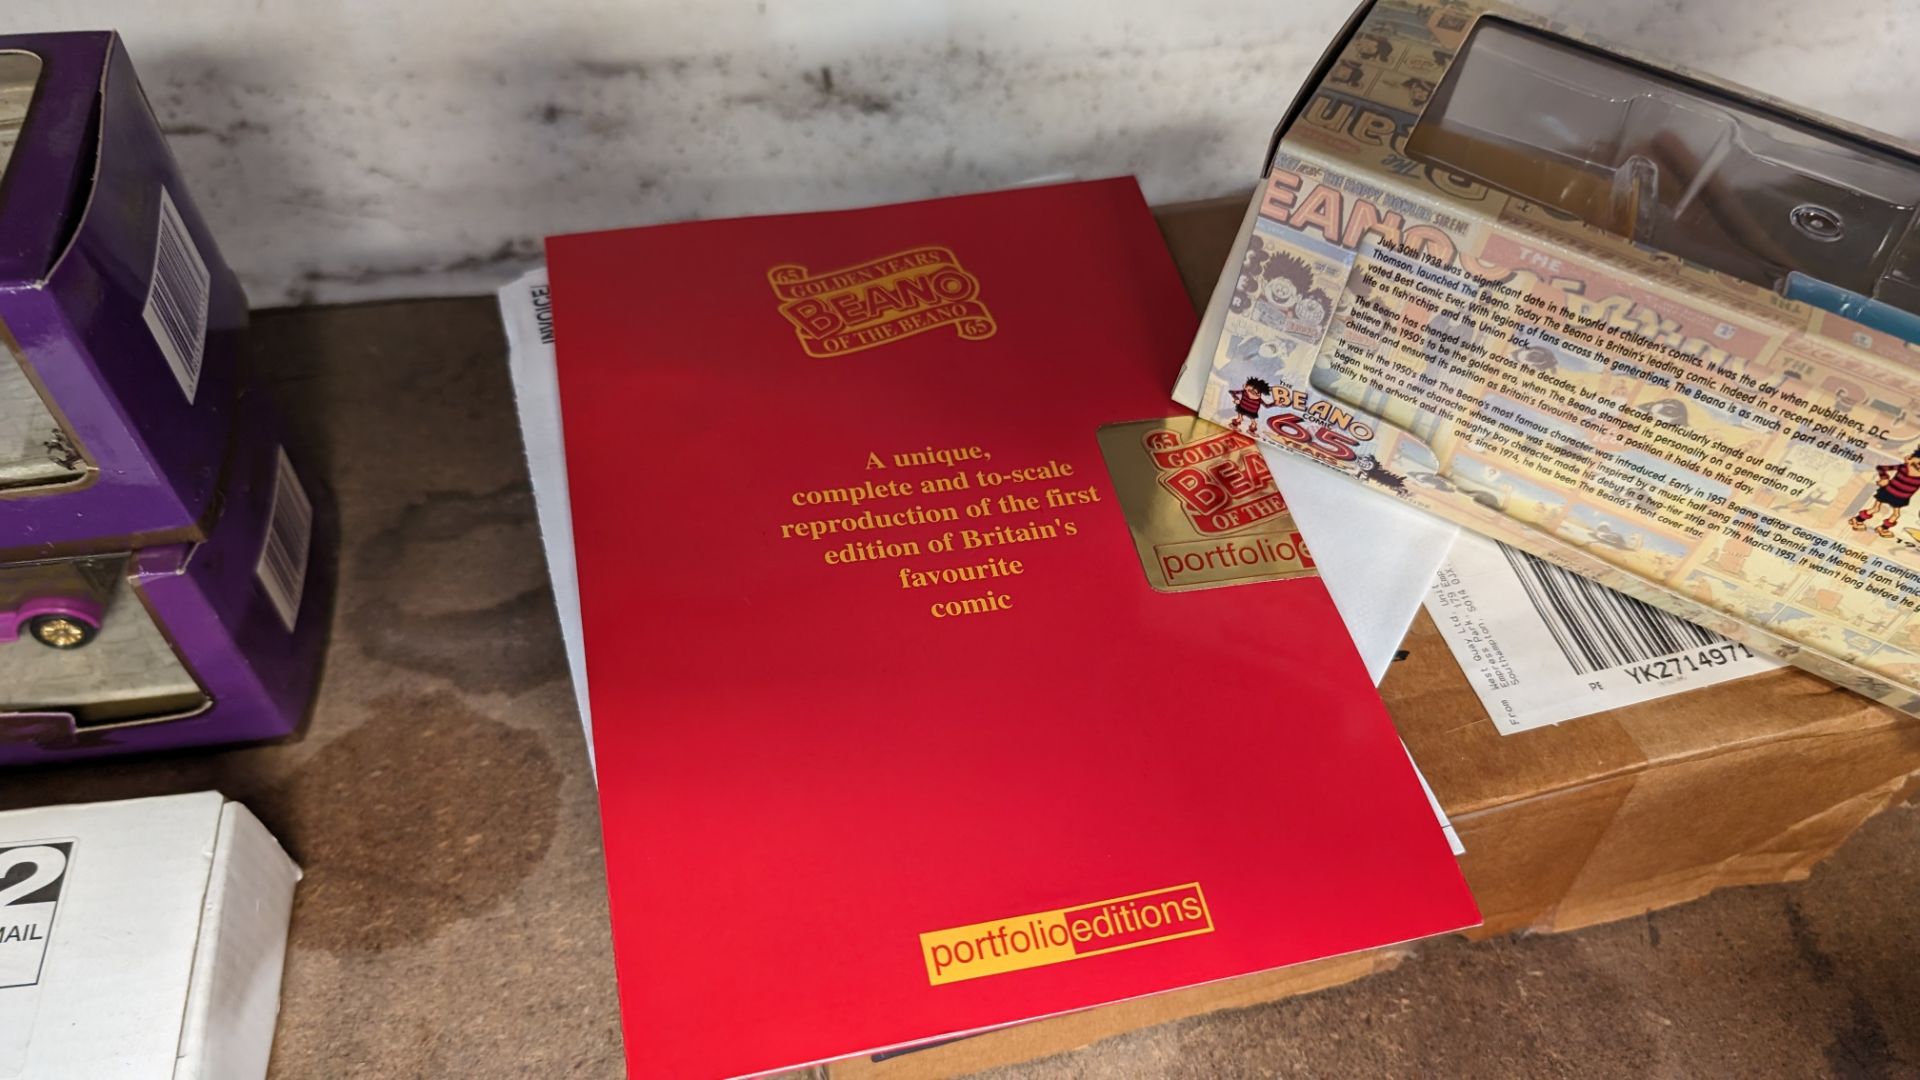 Beano 65th anniversary gift set including reproduction of the first edition of the comic plus 2 mode - Image 8 of 9